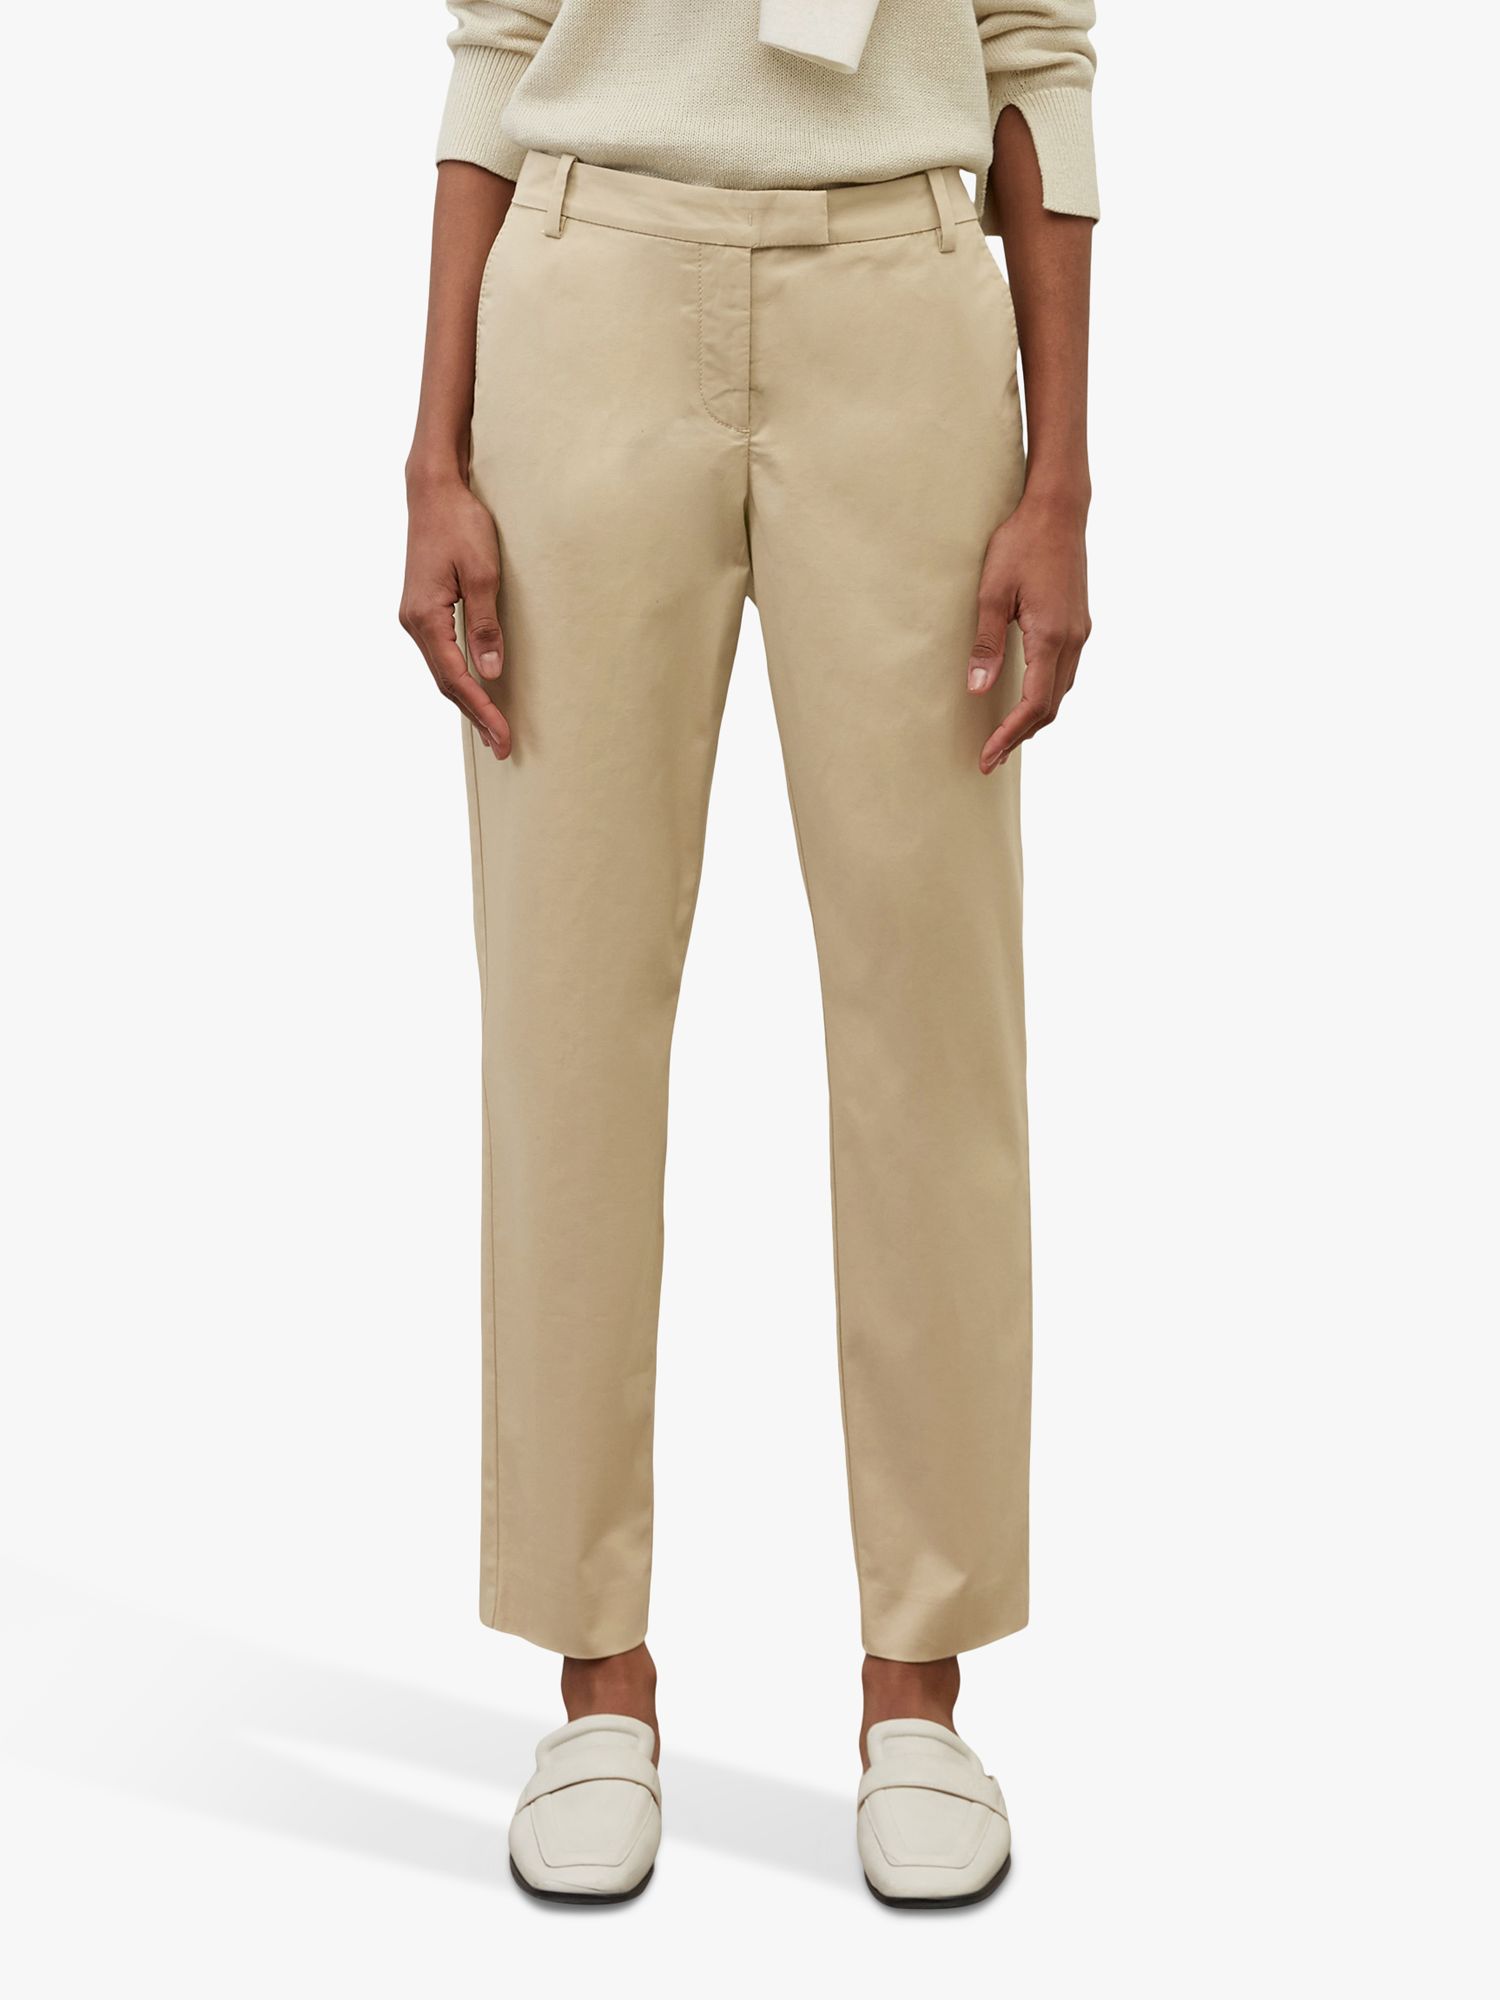 Marc O'Polo Comfy Slim Fit Trousers, Brown at John Lewis & Partners